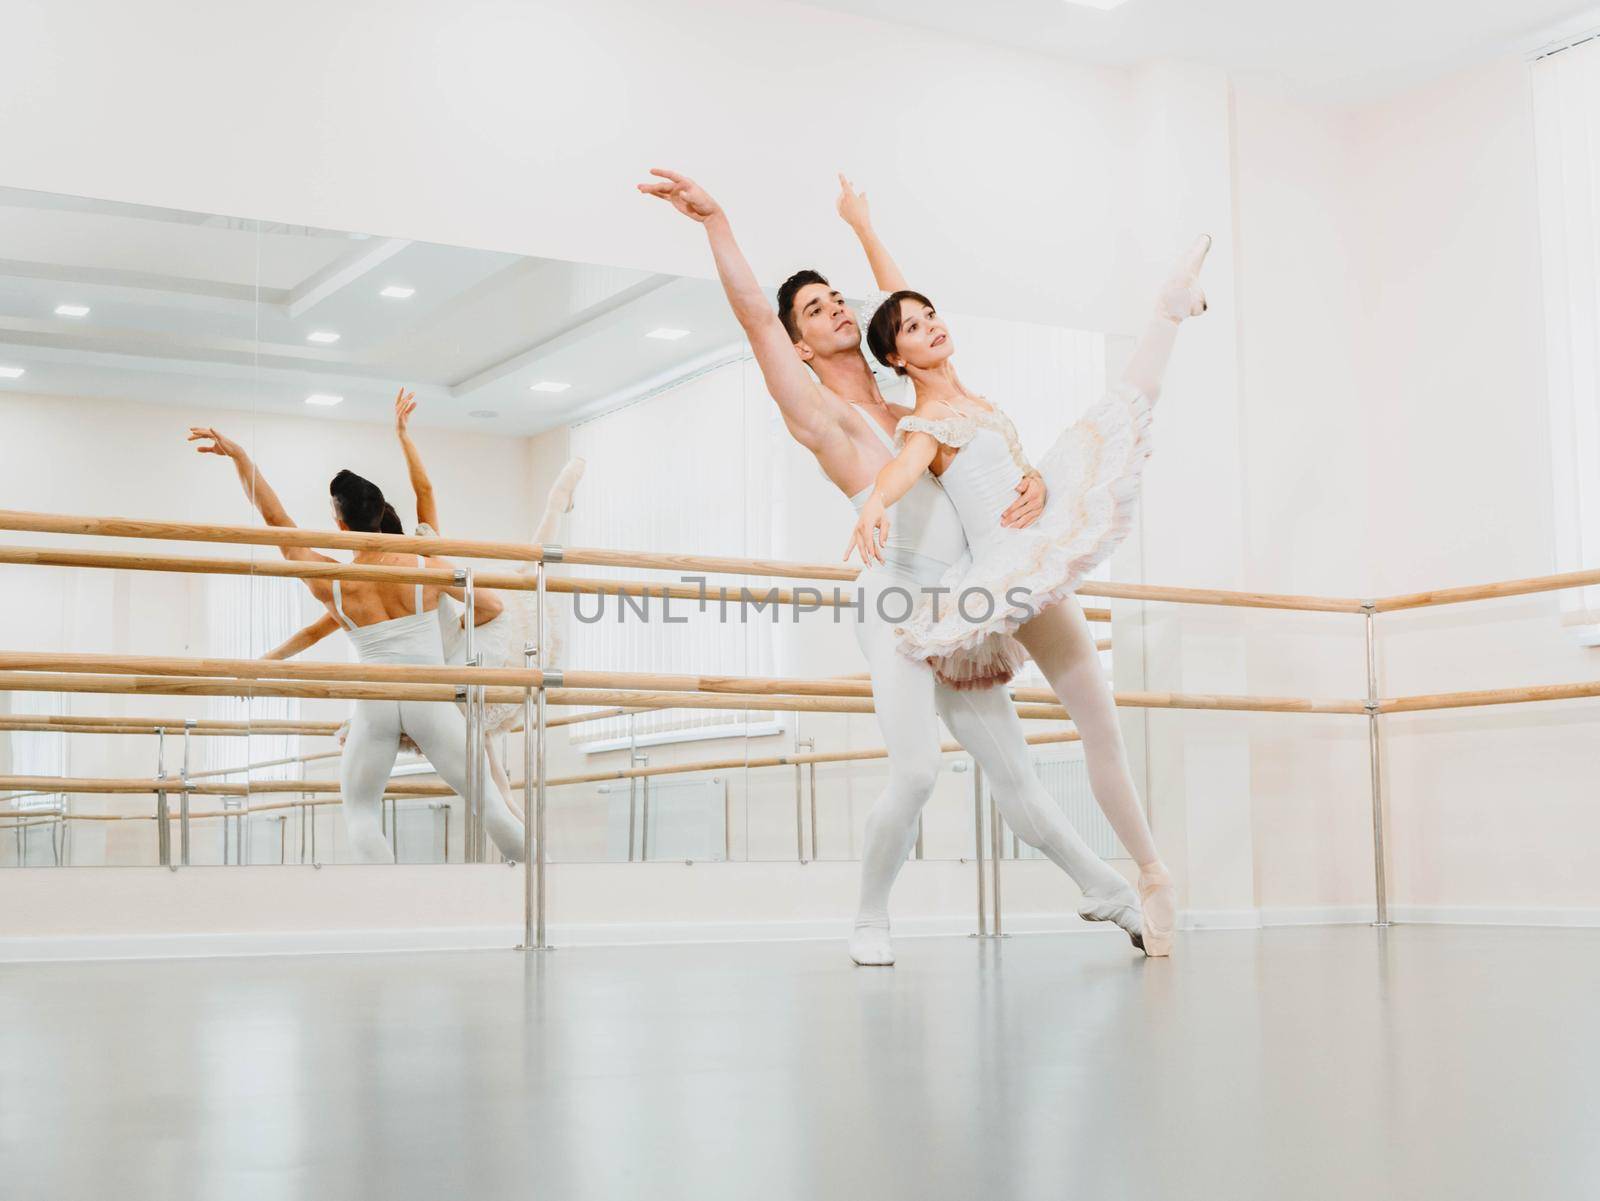 Professional, emotional ballet dancers practicing in the gym or hall with minimalism interior. Couple dancing a sensual dance before performance.